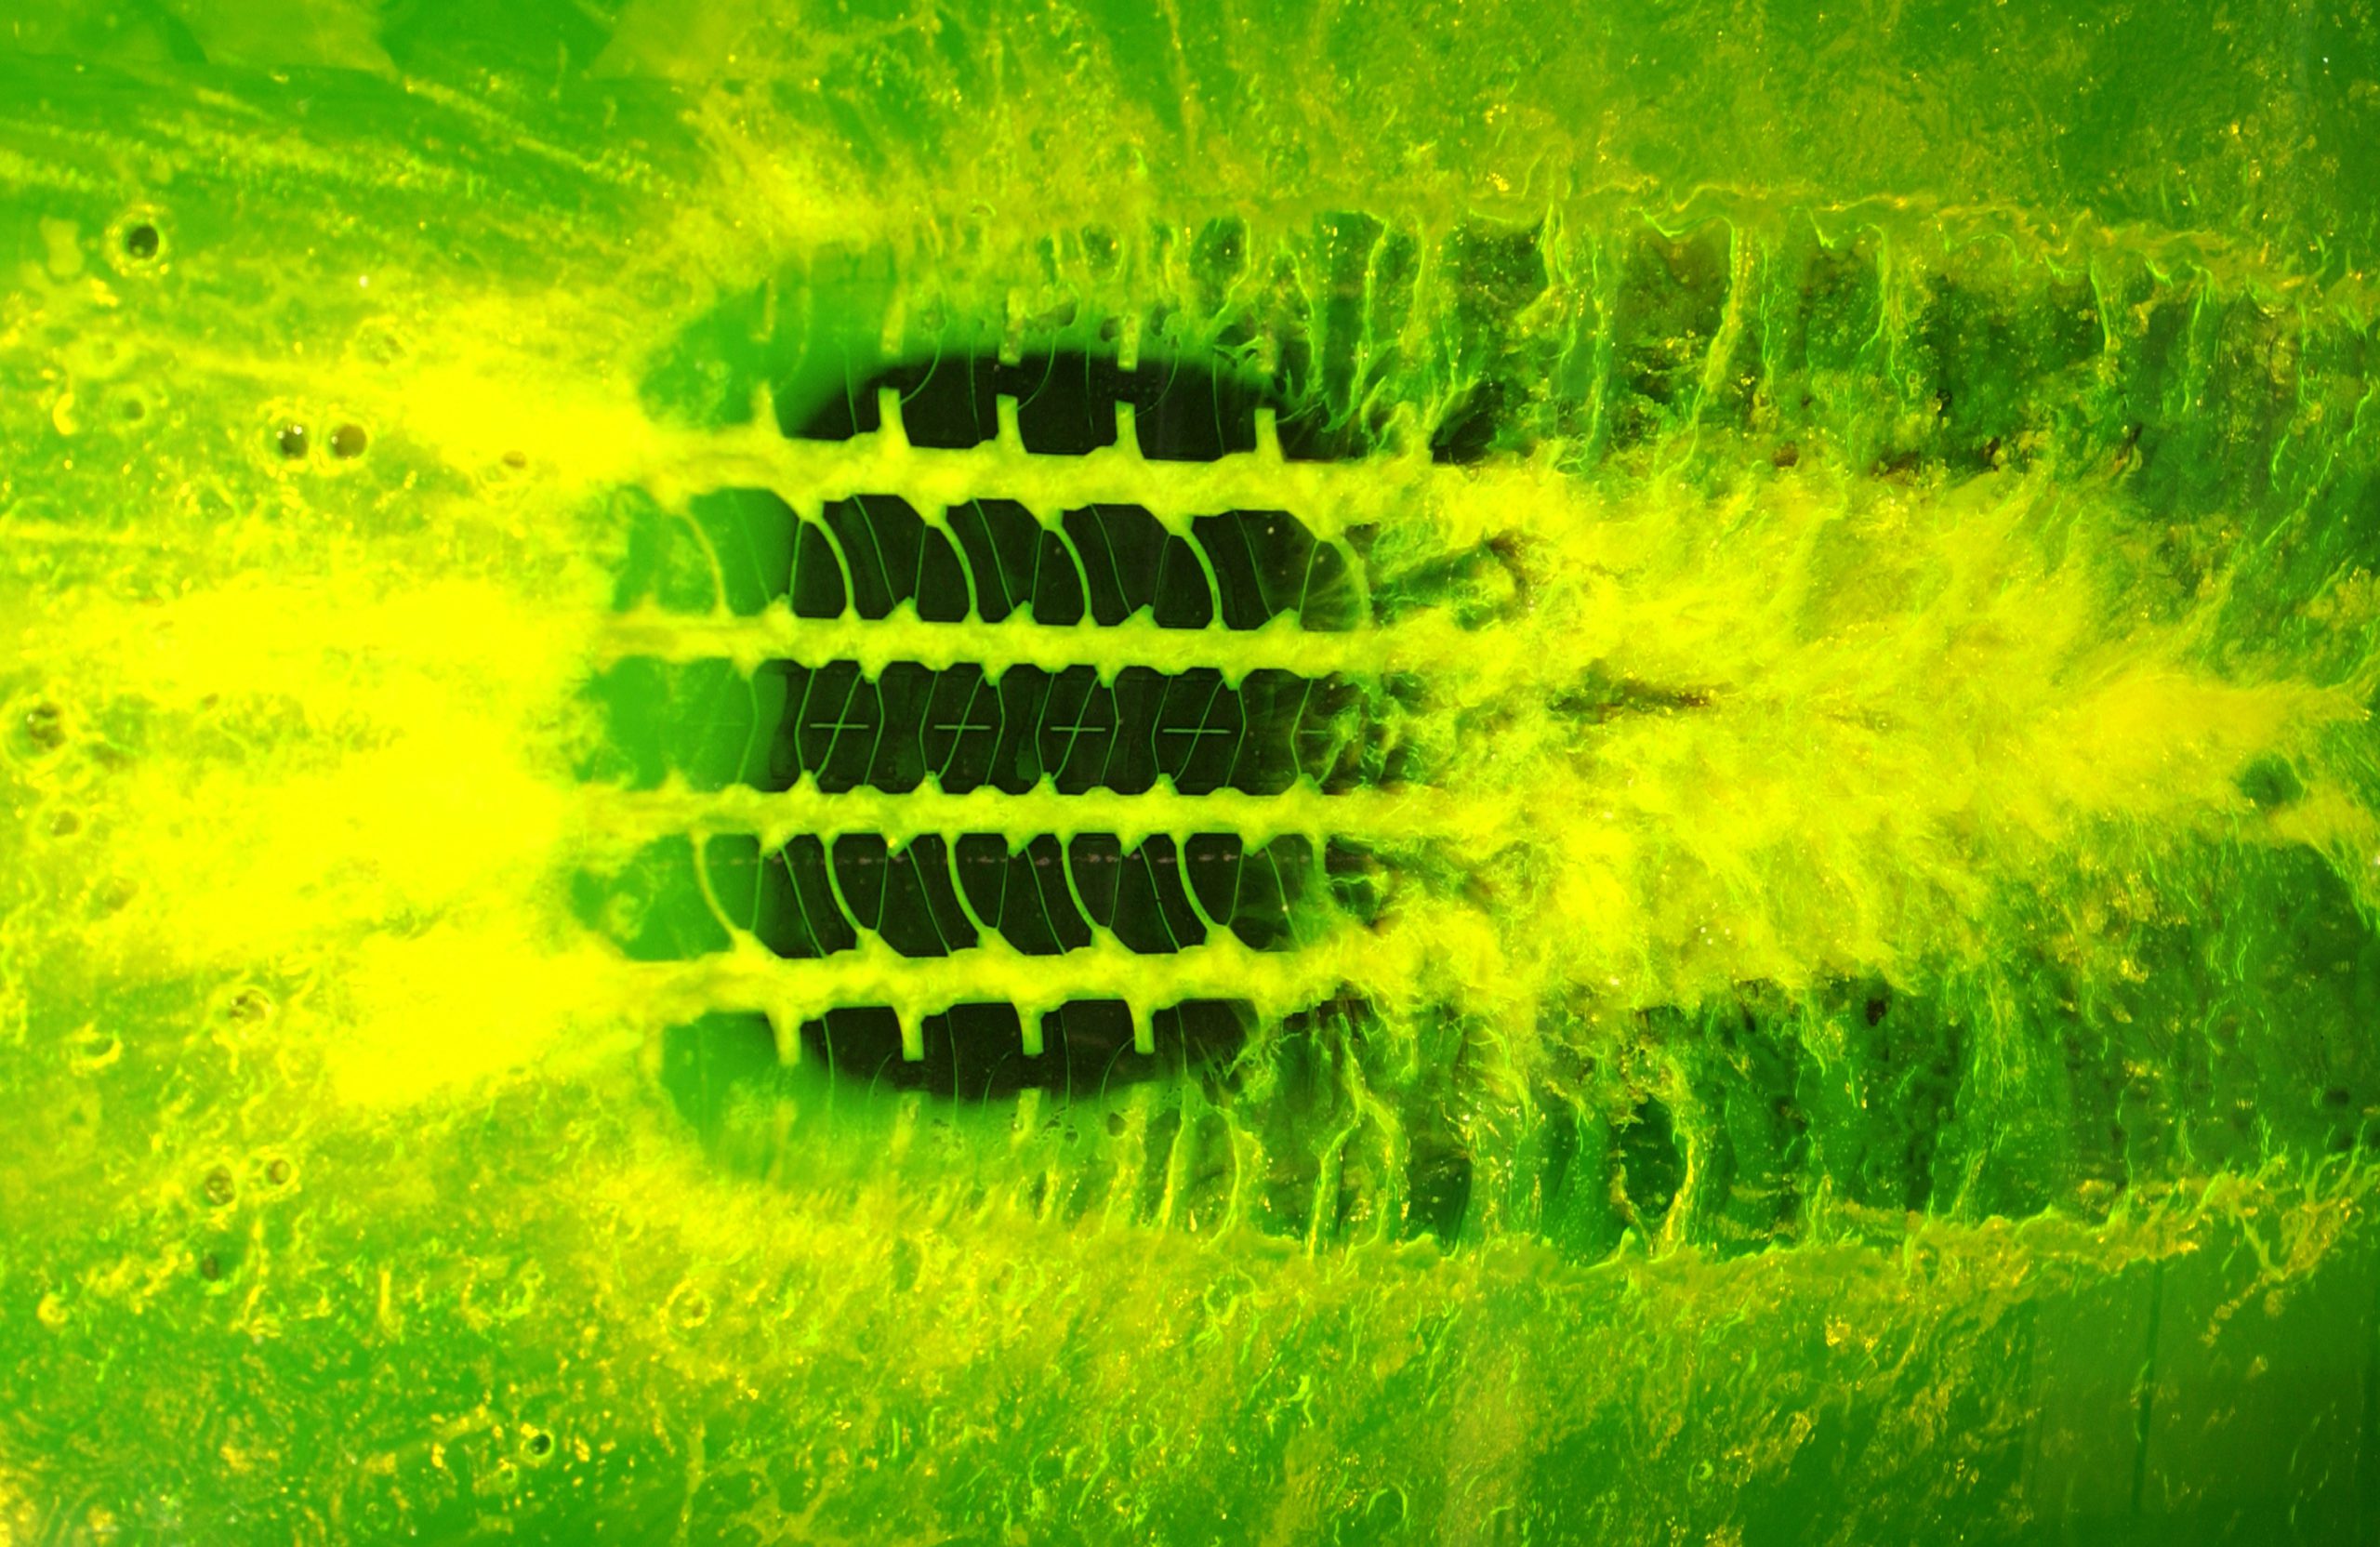 tire tread moving over a green and yellow liquid